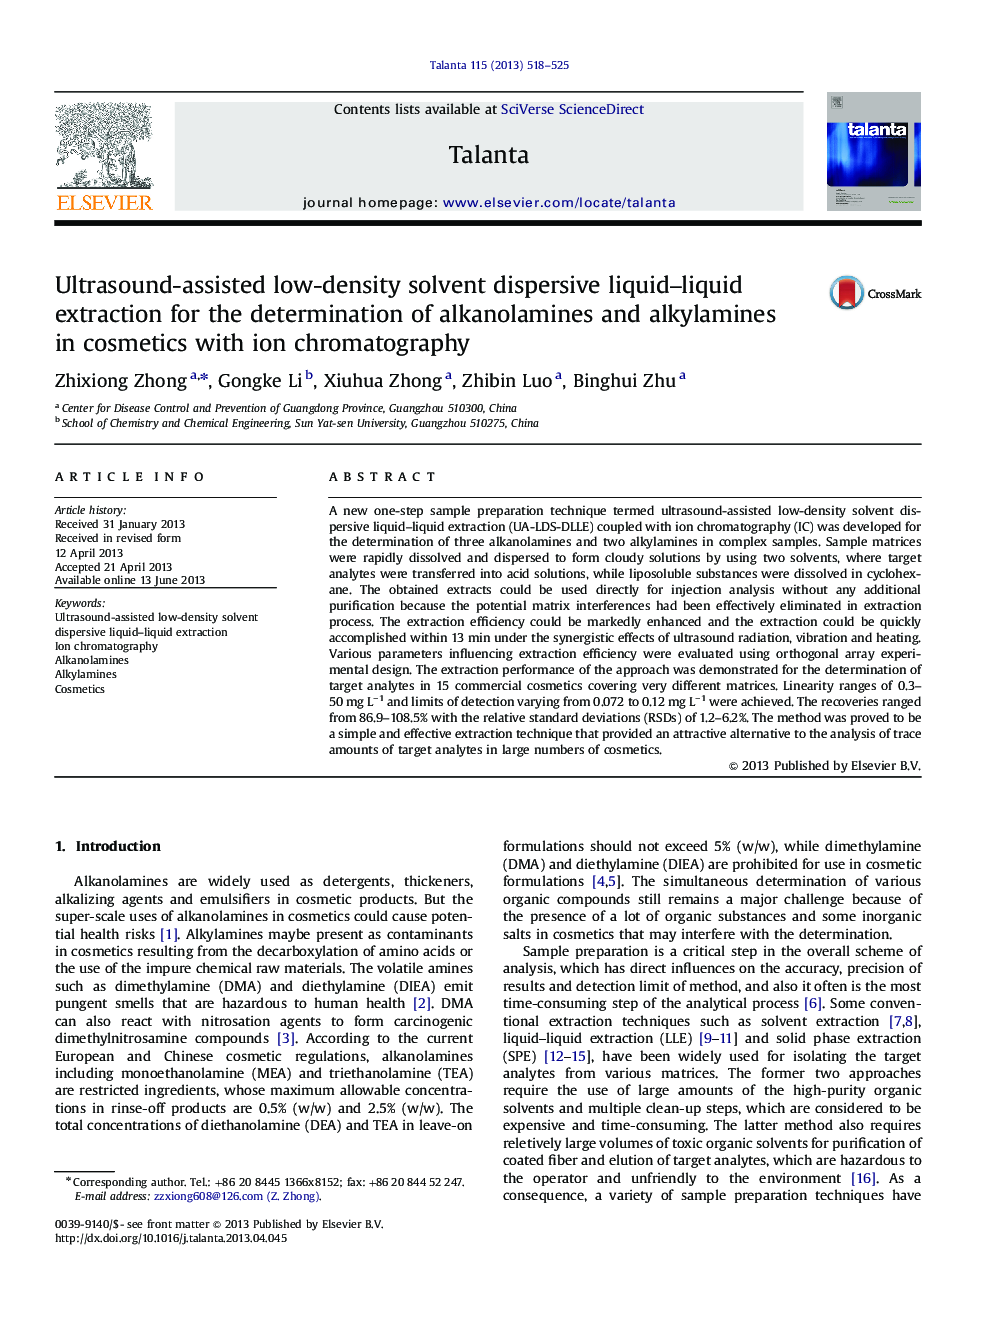 Ultrasound-assisted low-density solvent dispersive liquid-liquid extraction for the determination of alkanolamines and alkylamines in cosmetics with ion chromatography